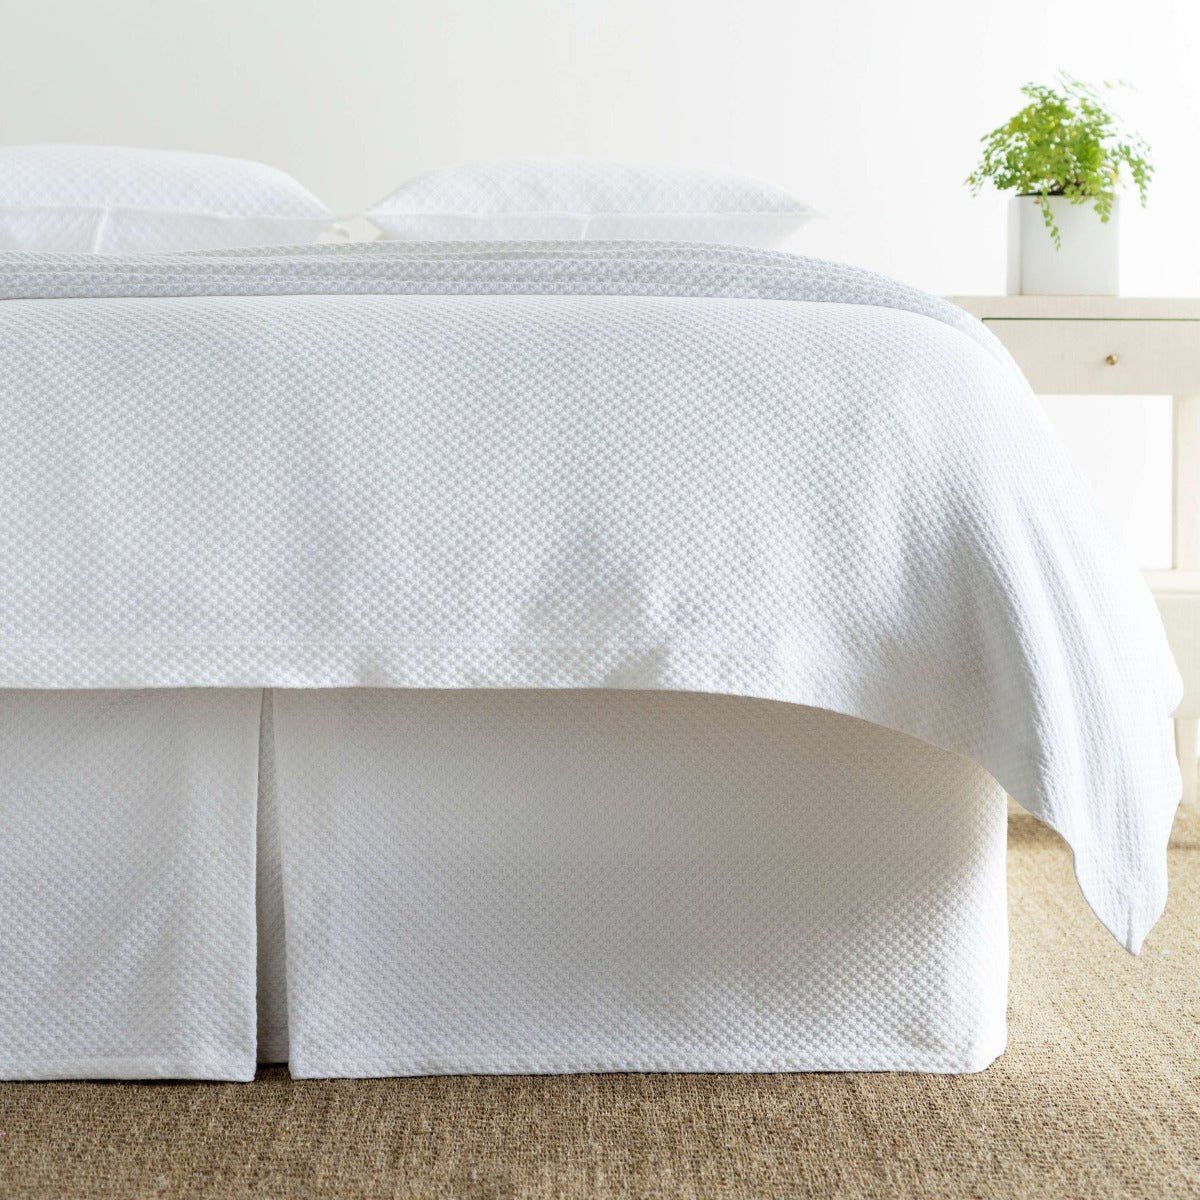 Petite Trellis White Matelasse bed skirt styled with white bedding. Styled view. 